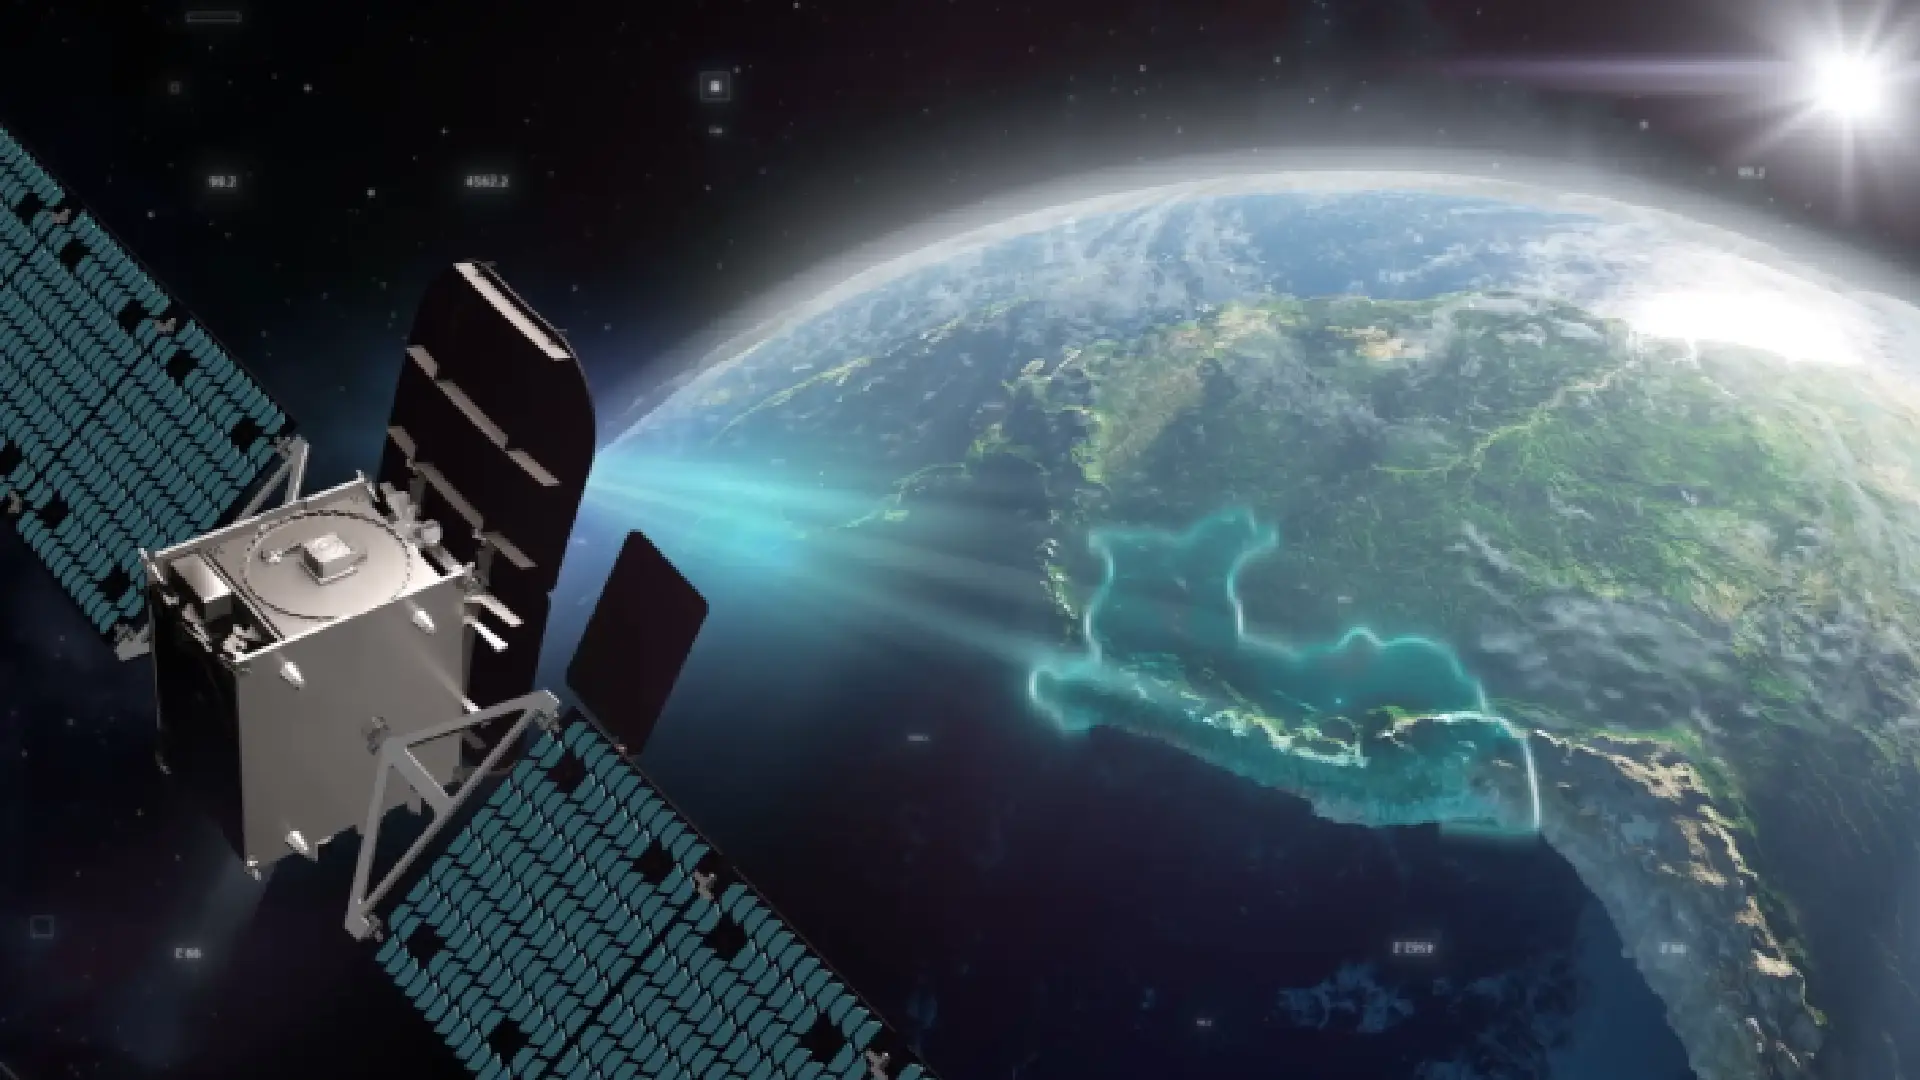 Astranis Shifts to Backup Plan After First Commercial Internet Satellite Malfunctions in Orbit